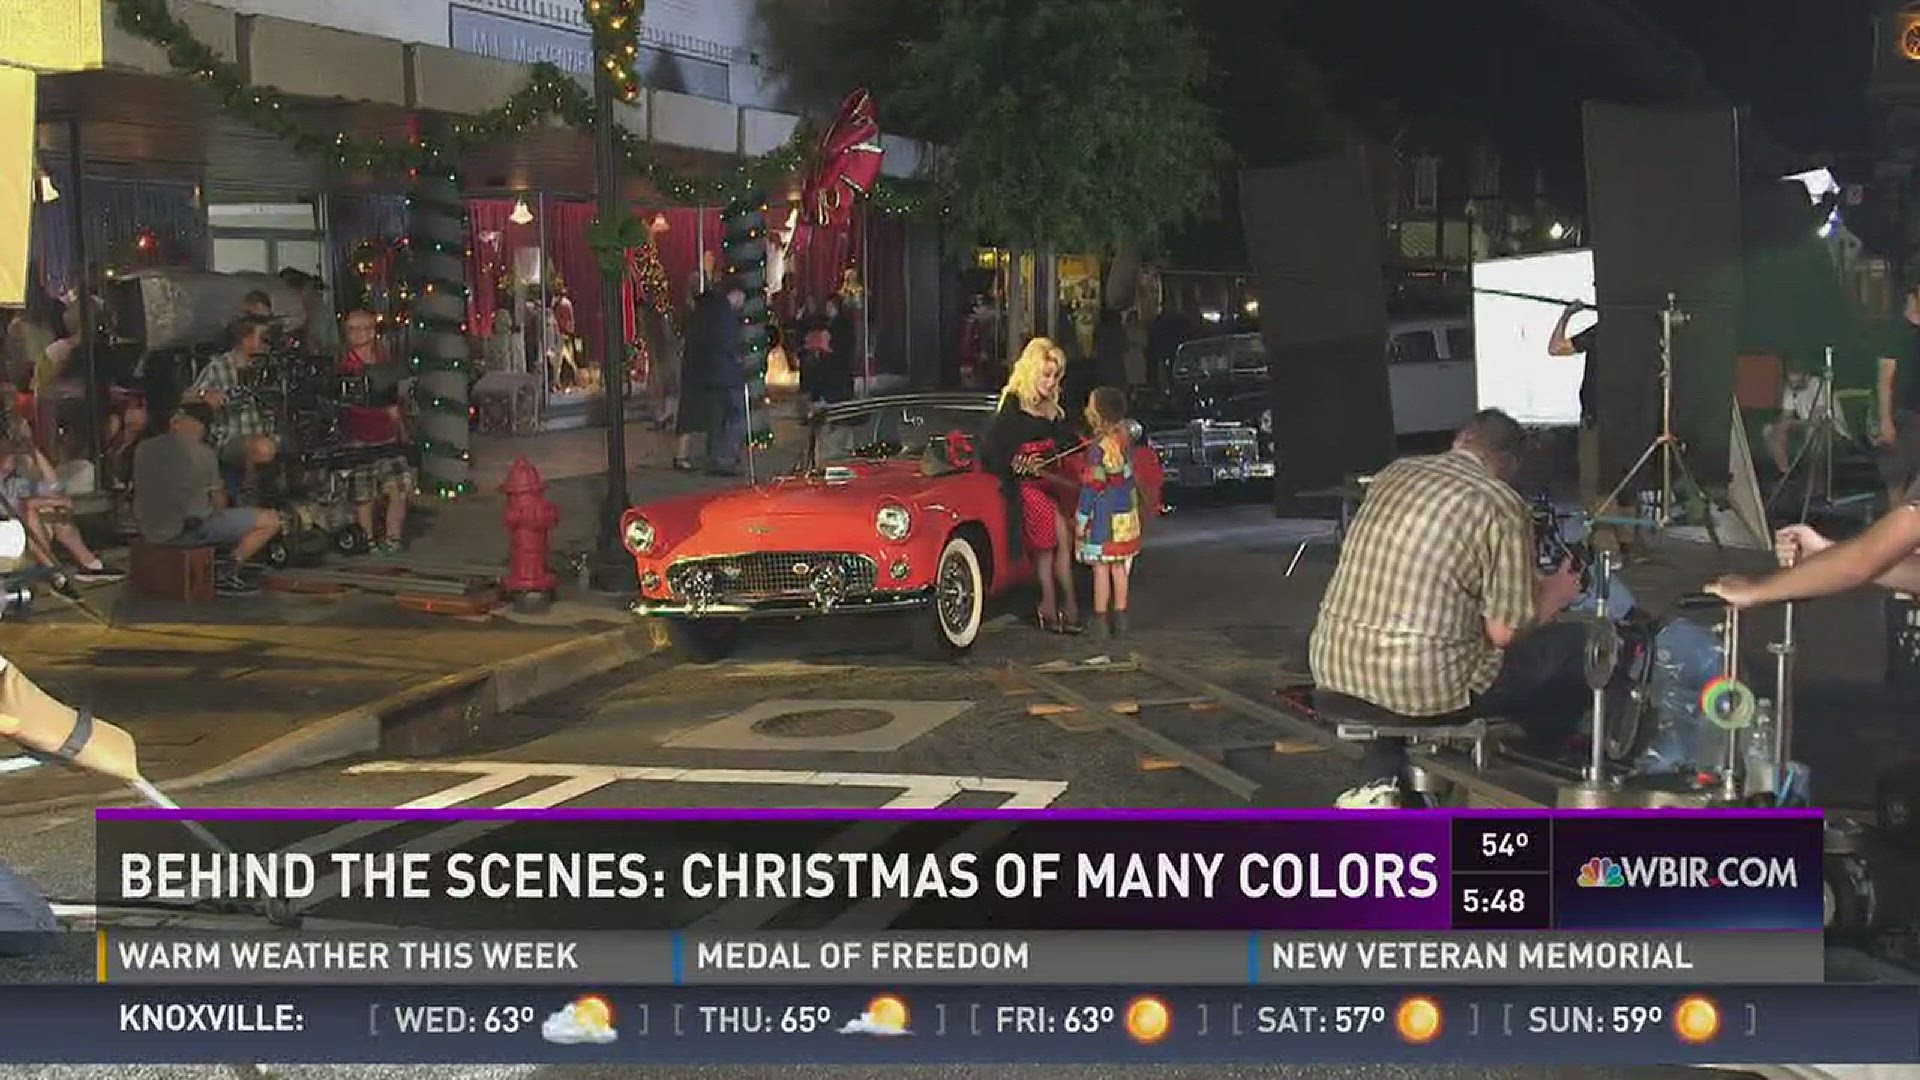 Nov. 22, 2016: Dolly Parton's new movie "Christmas of Many Colors" recreates scenes from the country superstar's childhood in Sevier County.